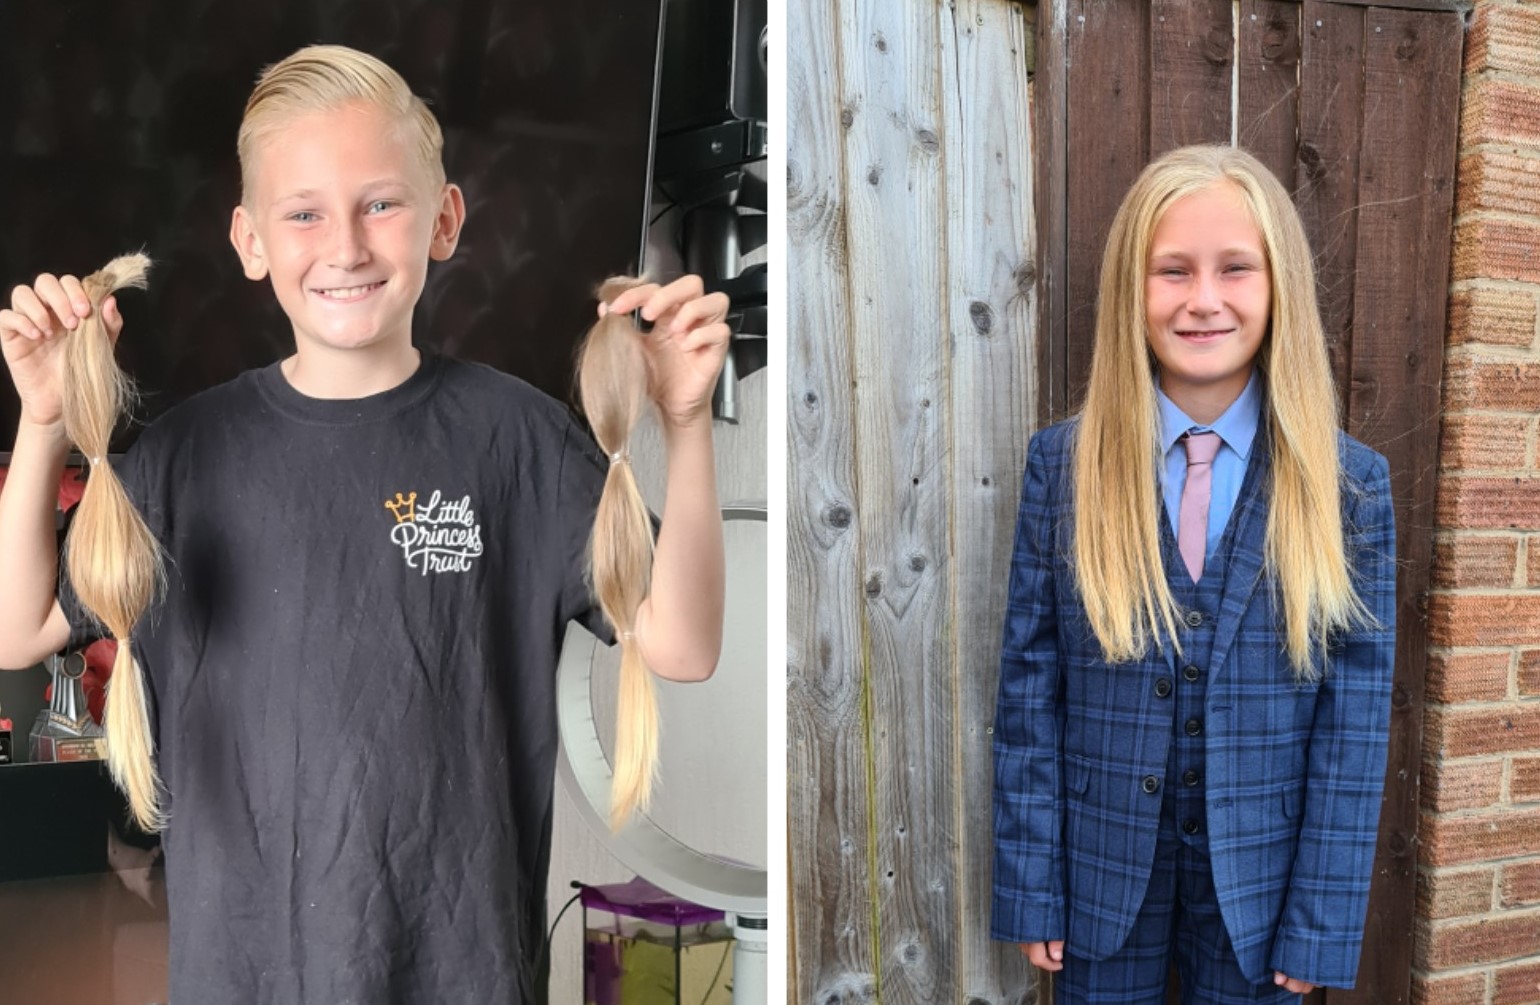 Jacob McPeake grew his hair long to help us provide wigs to children and young people.